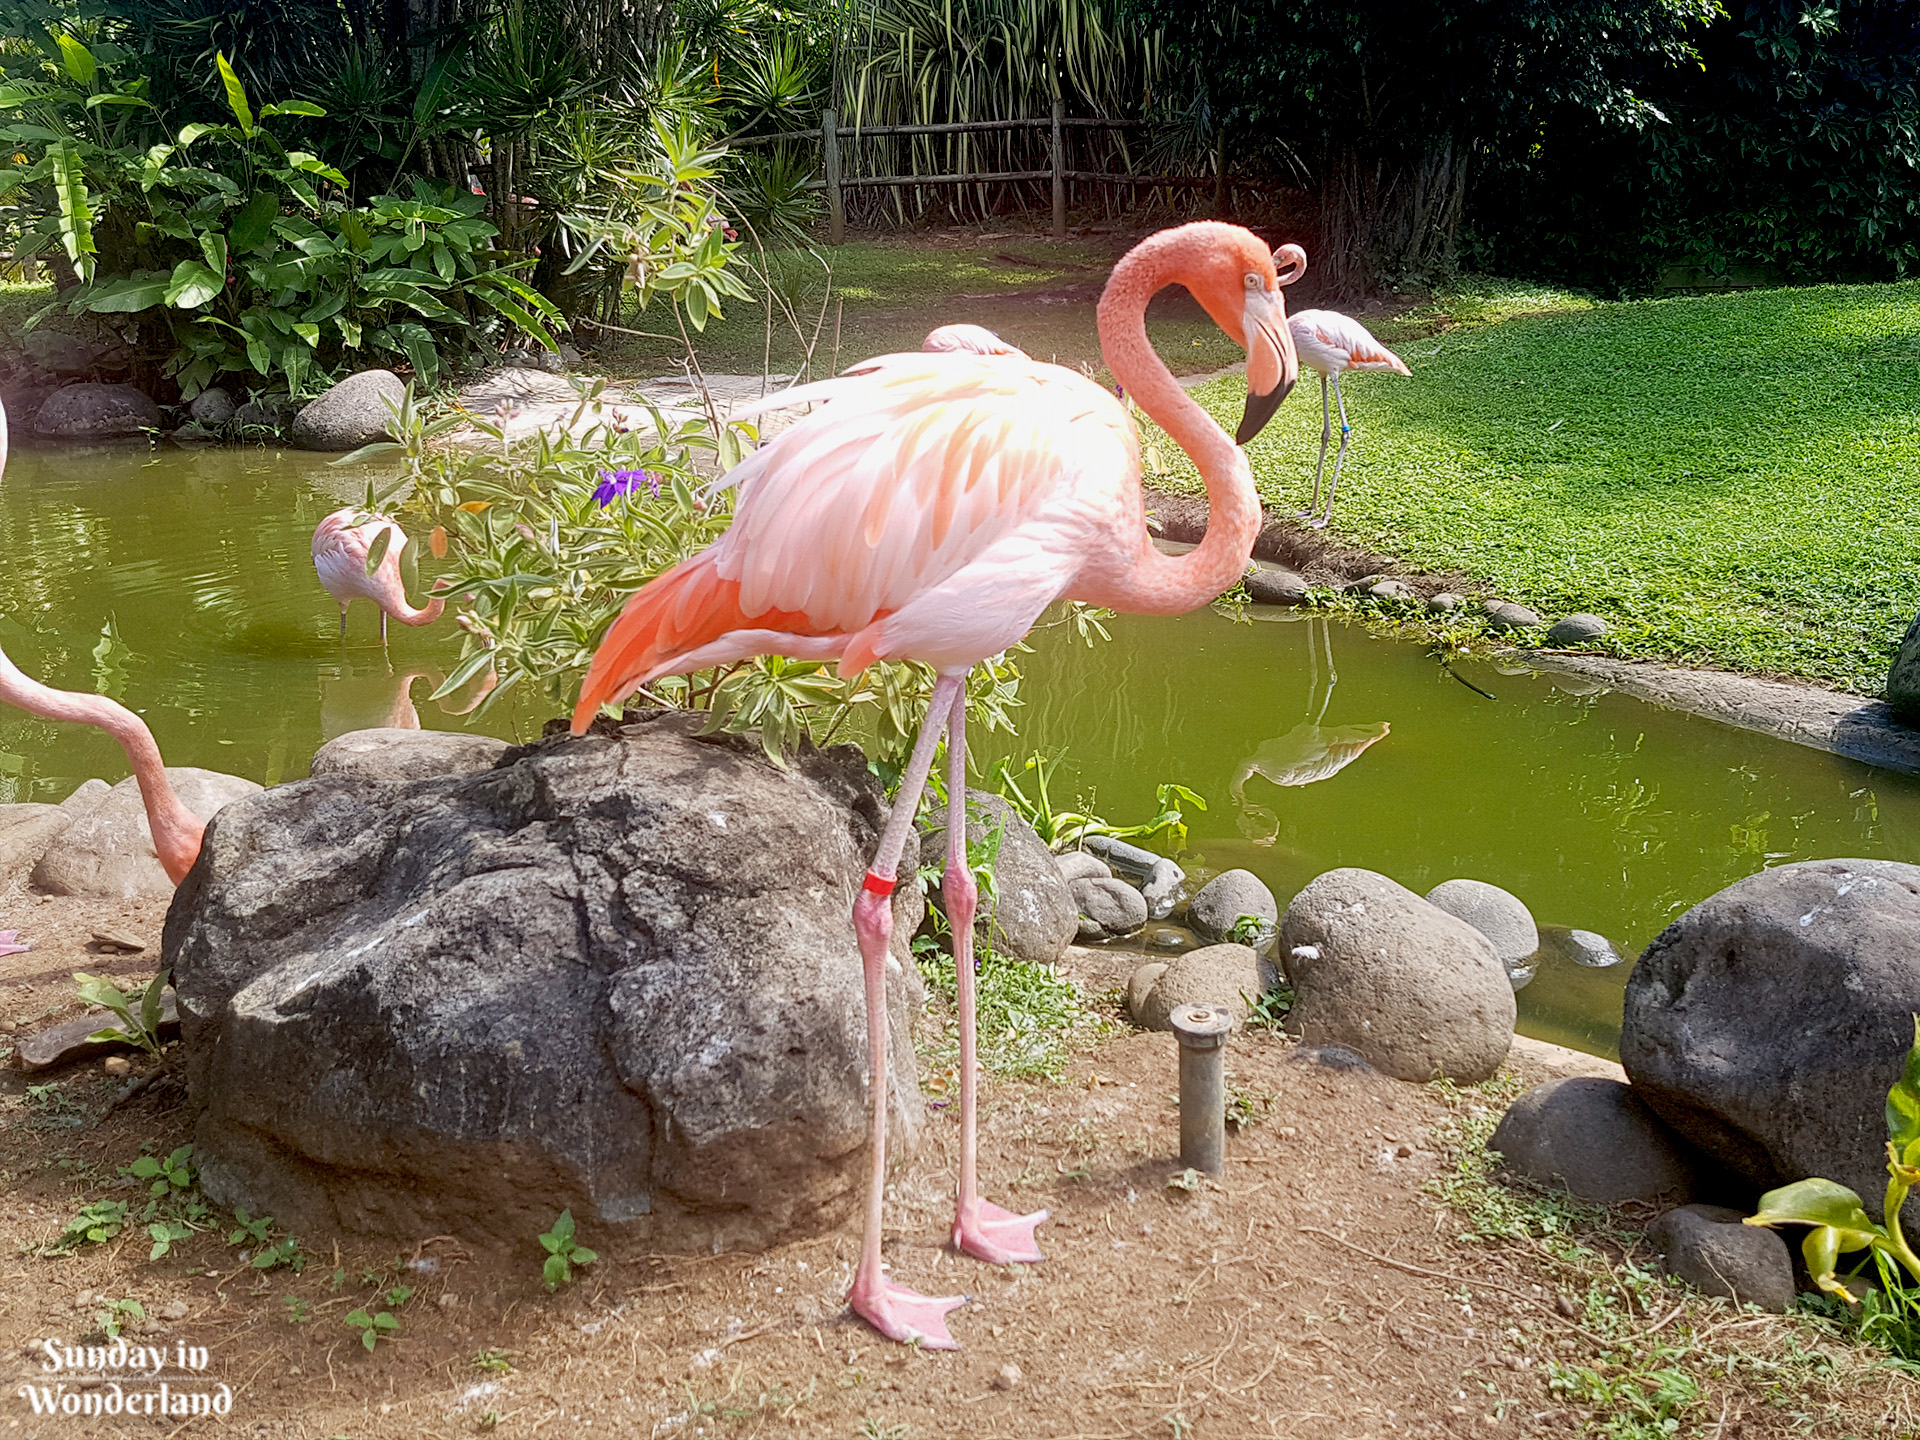 A pink flamingo standing in Botanical Garden in Deshaies in Guadeloupe - Sunday in Wonderland Blog